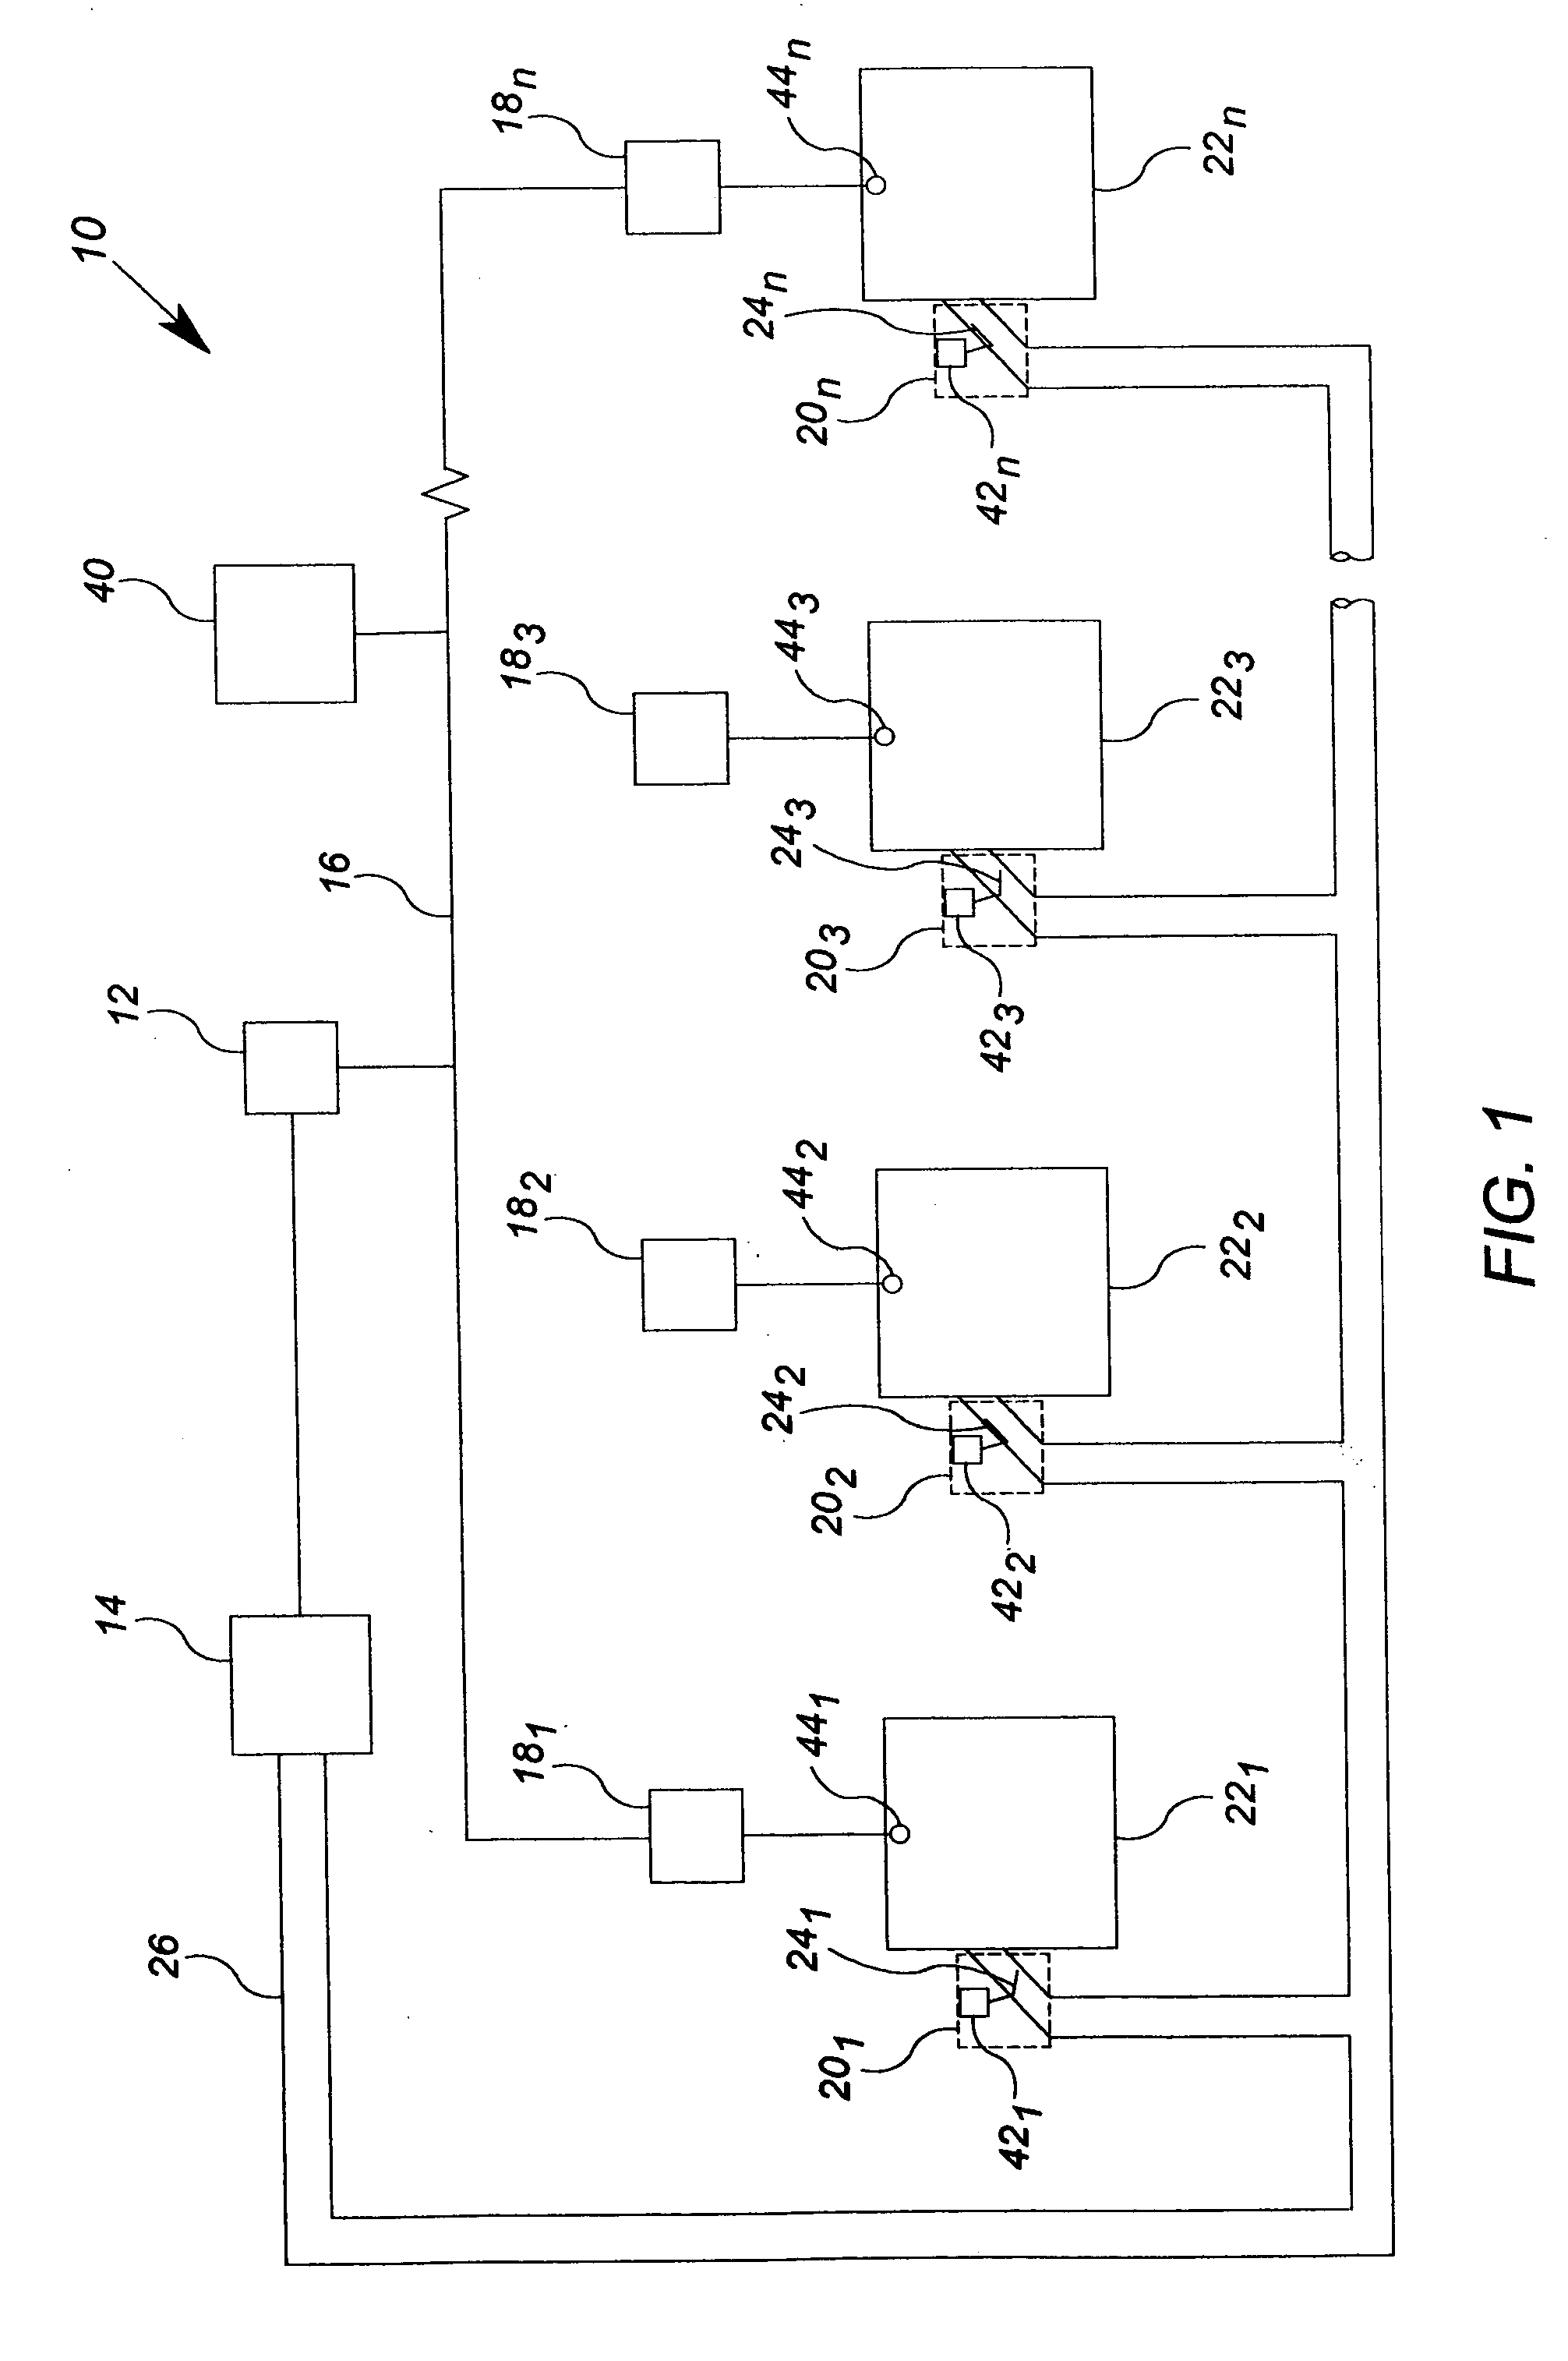 System and method for automatically replacing nodes in a network